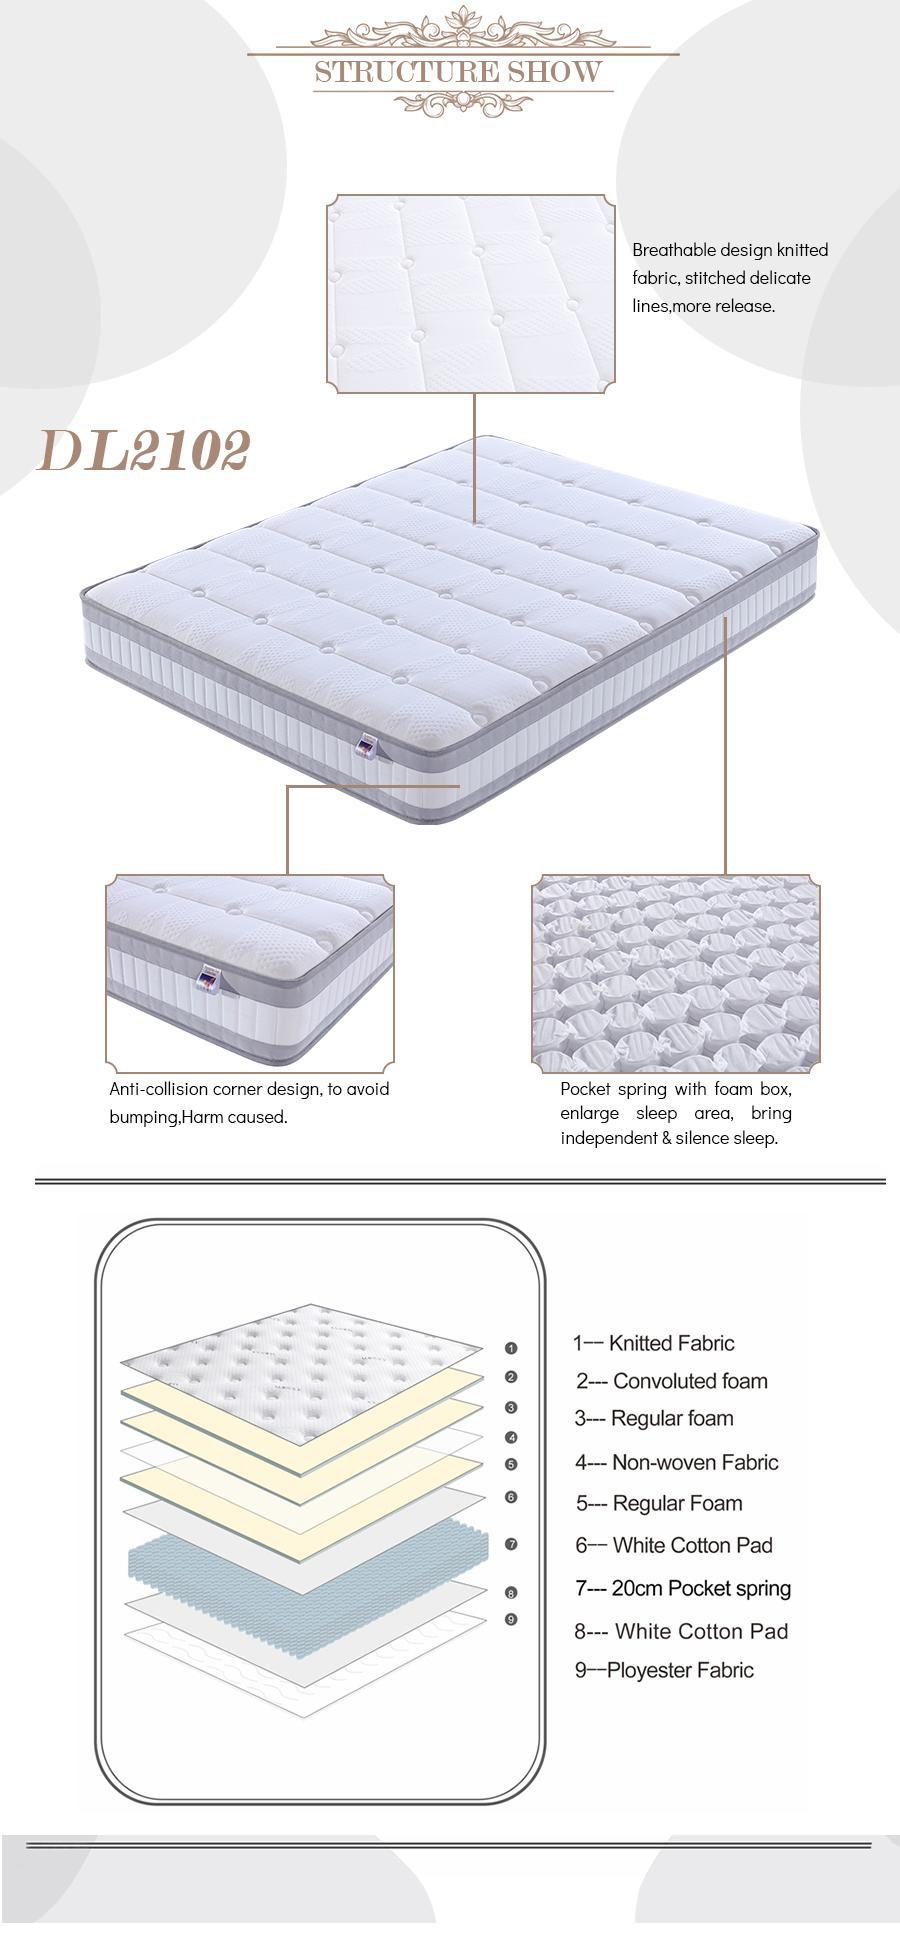 Knitted Fabric New Dreamleader/OEM Compress and Roll in Carton Box Malaysia Mattress Foam